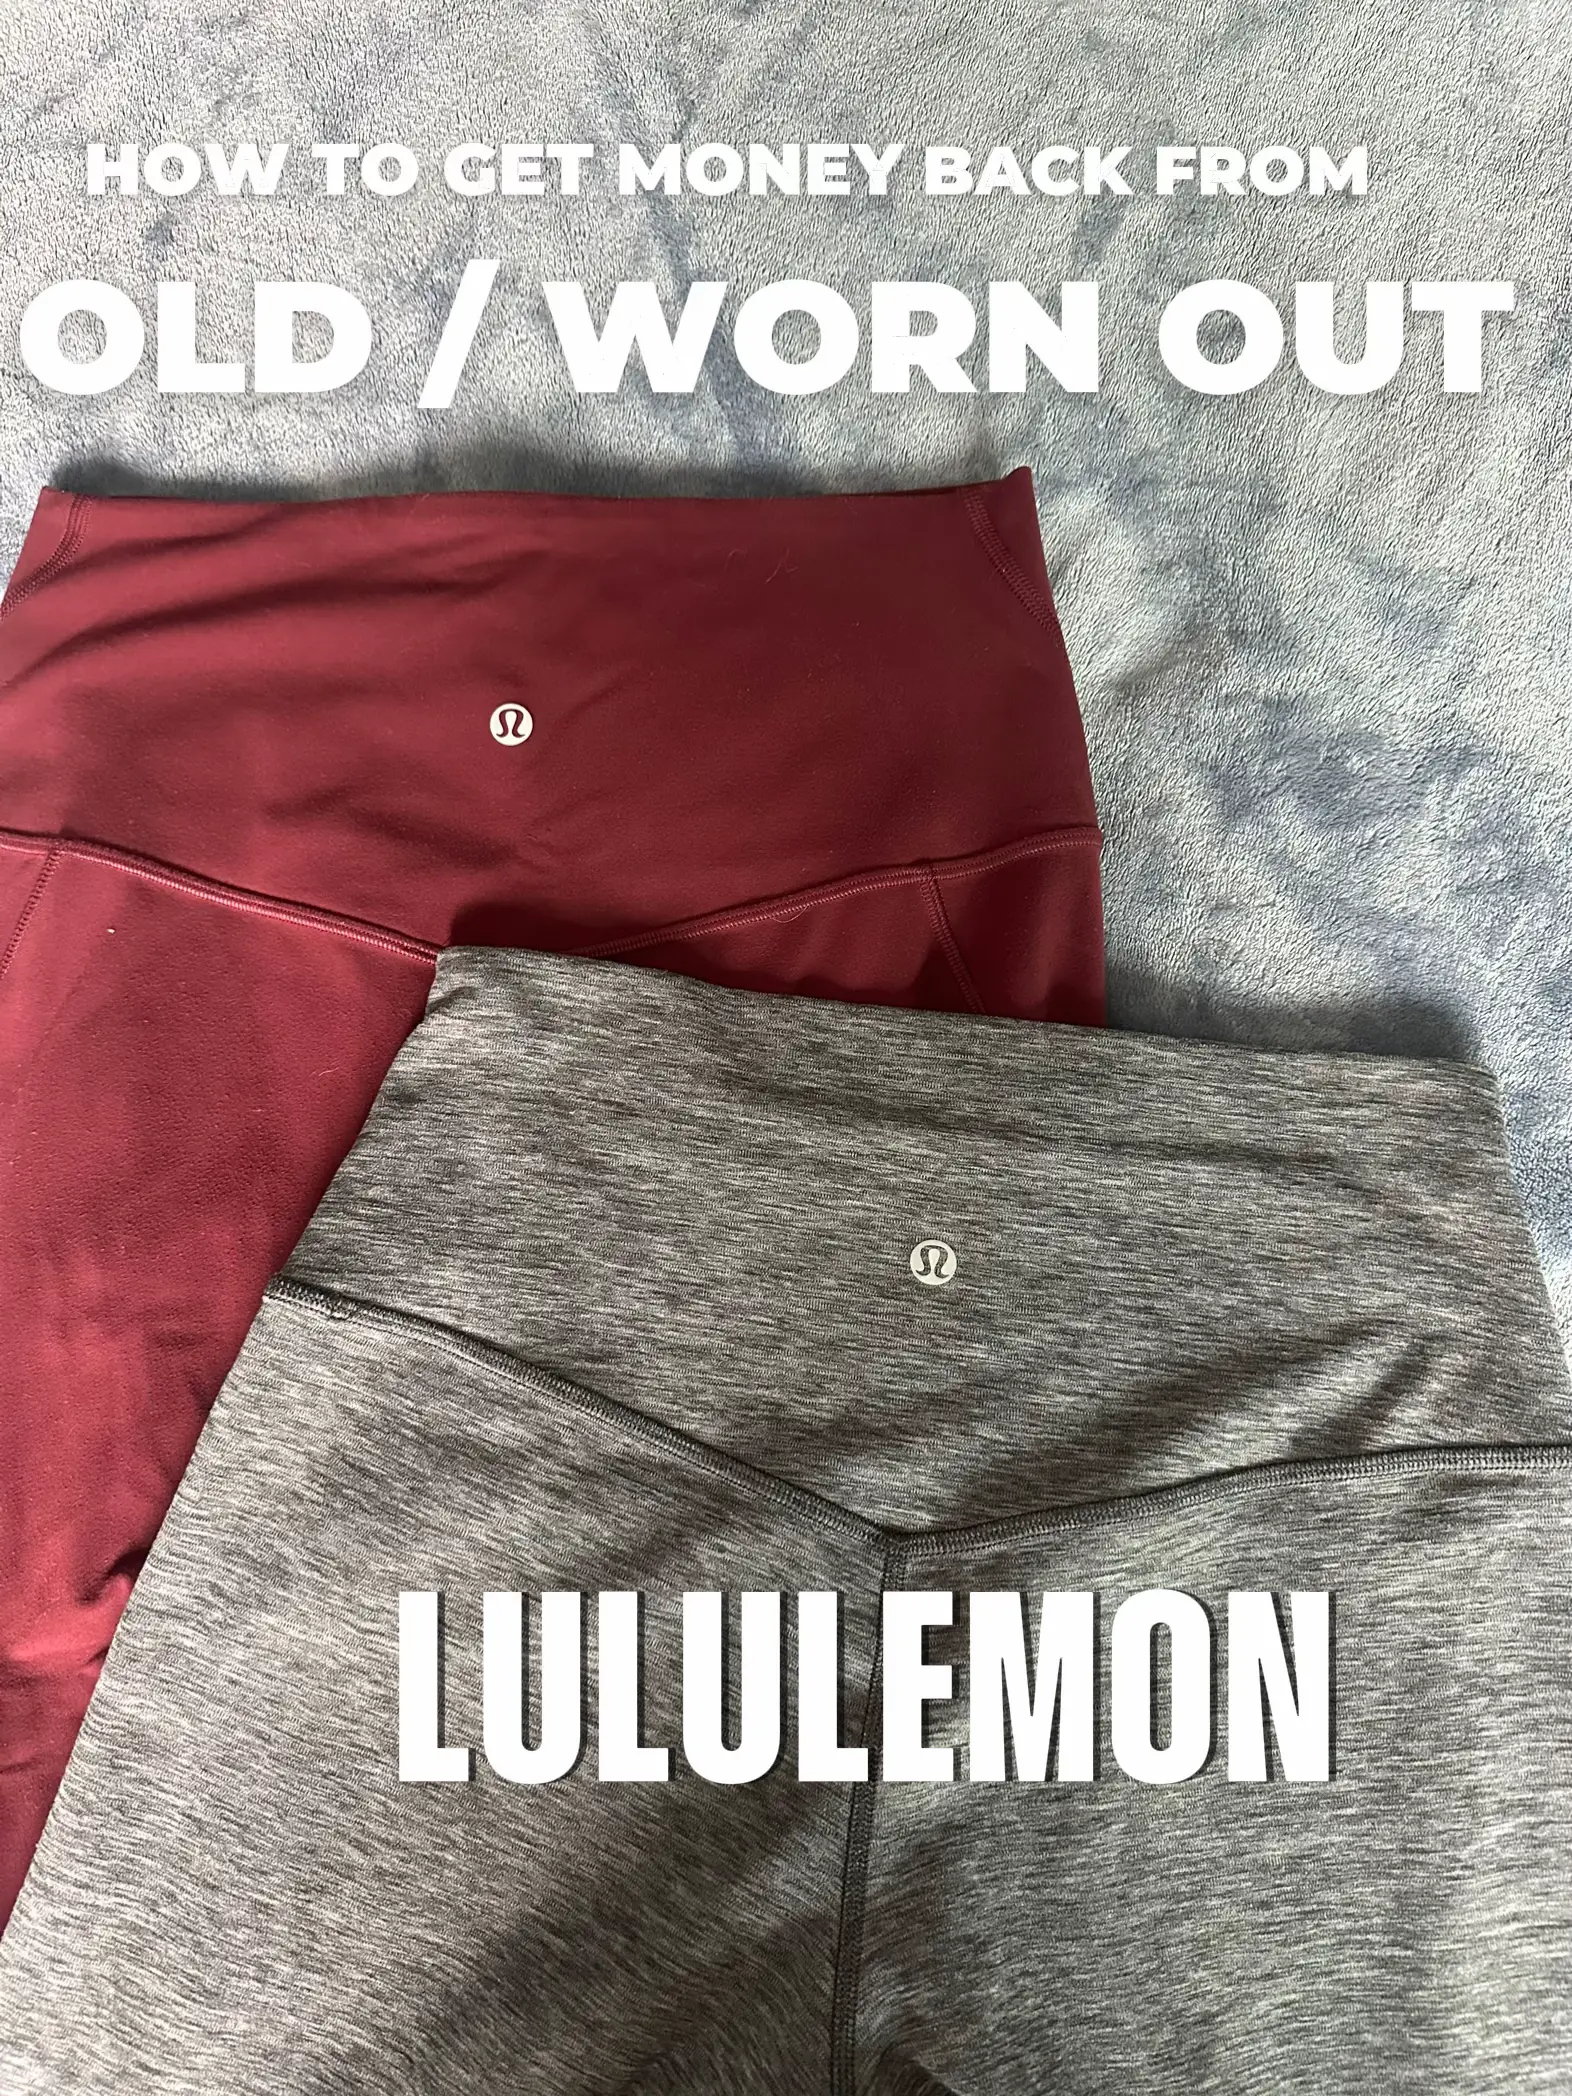 there's not a single day where this doesn't happen #fyp #lululemon